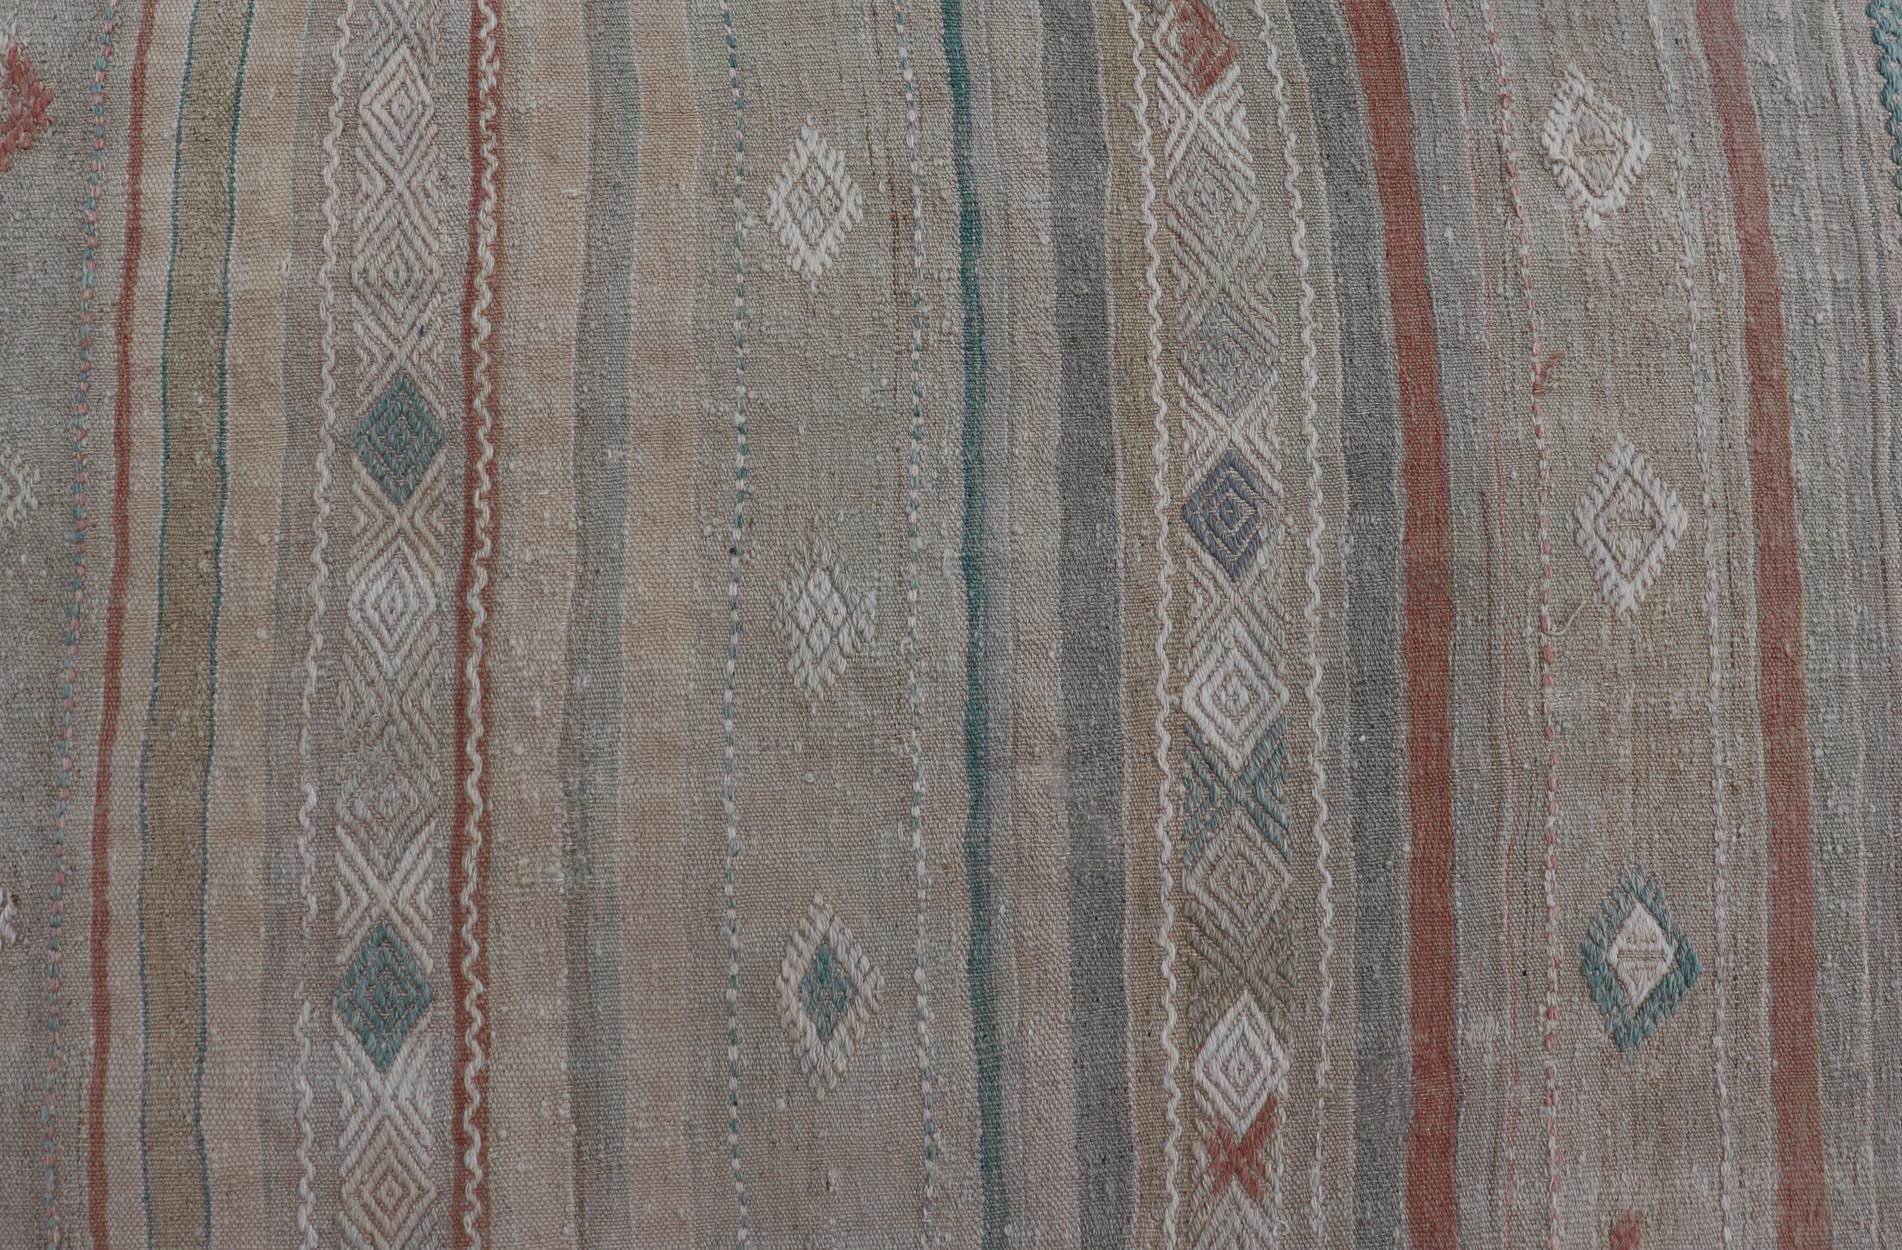 Turkish Flat-Weave Embroideries Kilim in Taupe, Green, Teal, Cream, and Brown For Sale 1